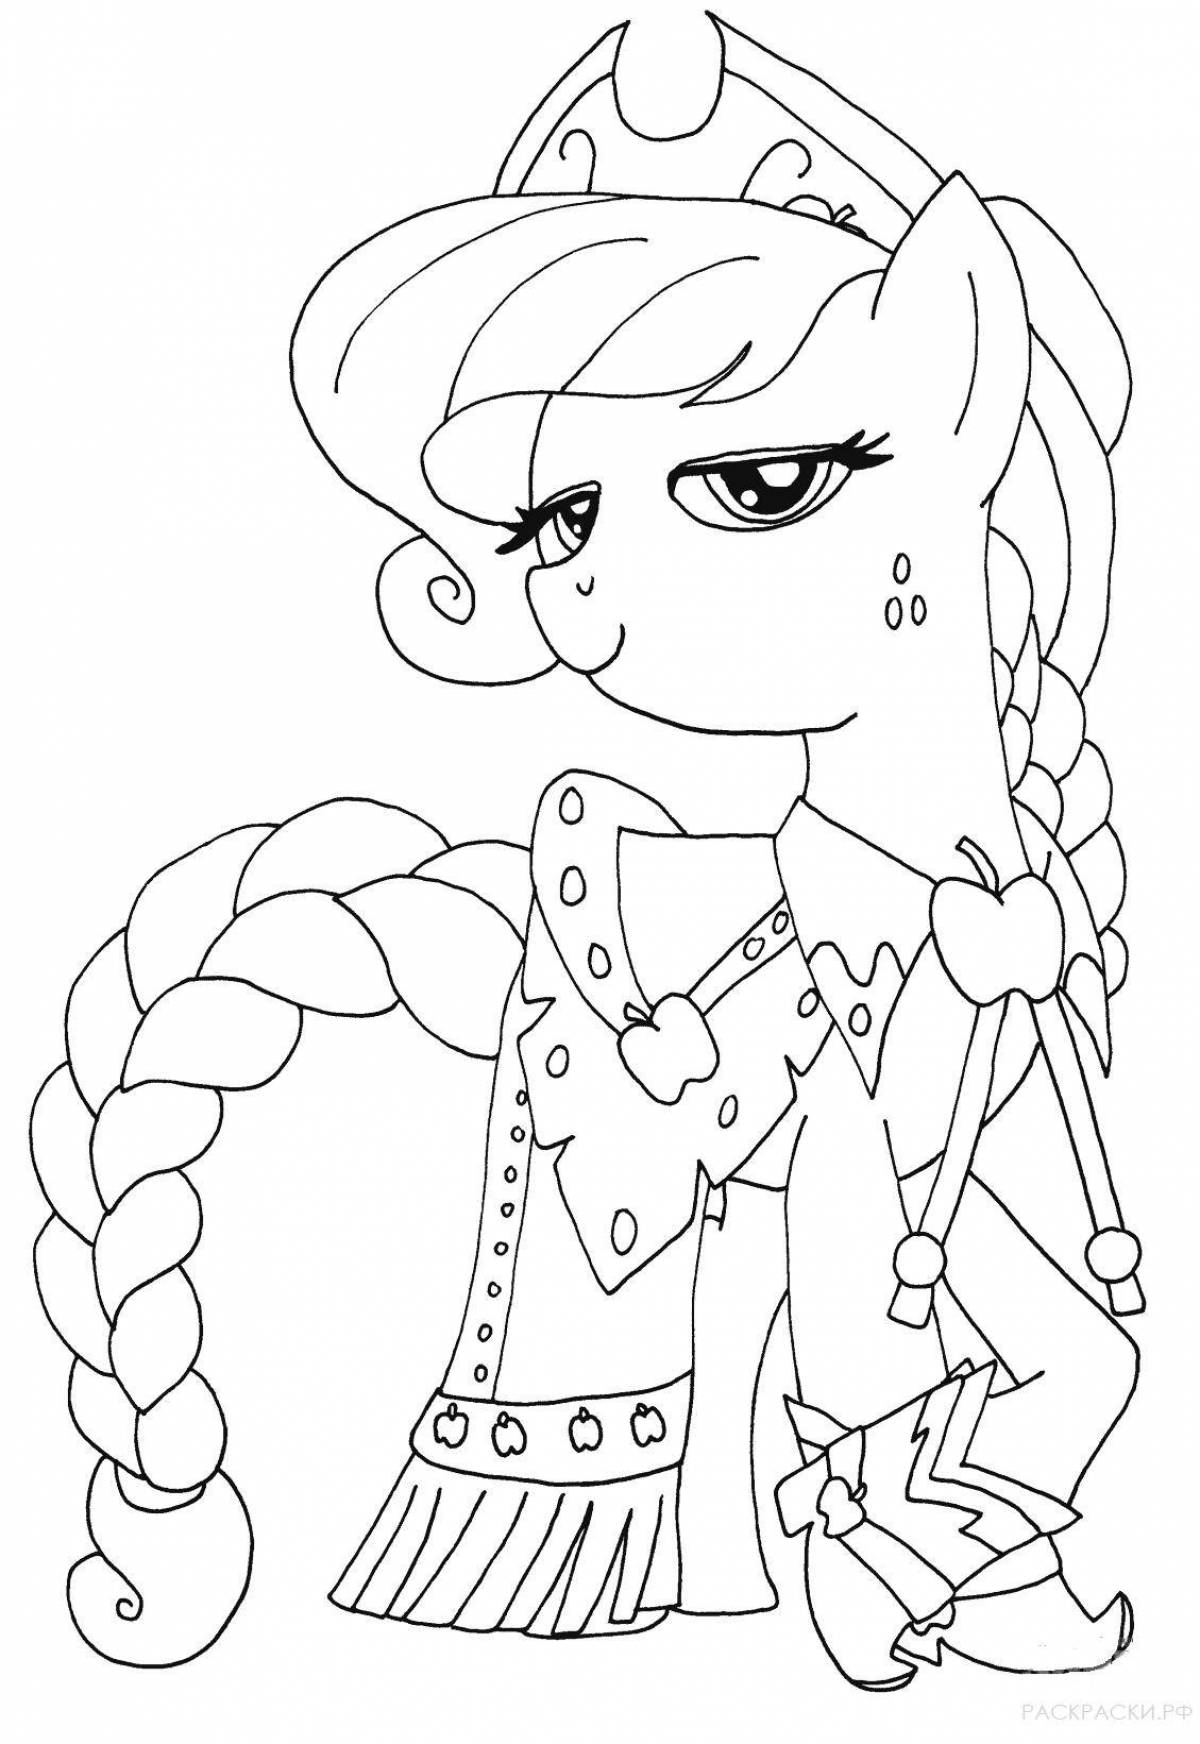 Apple jack pony coloring book